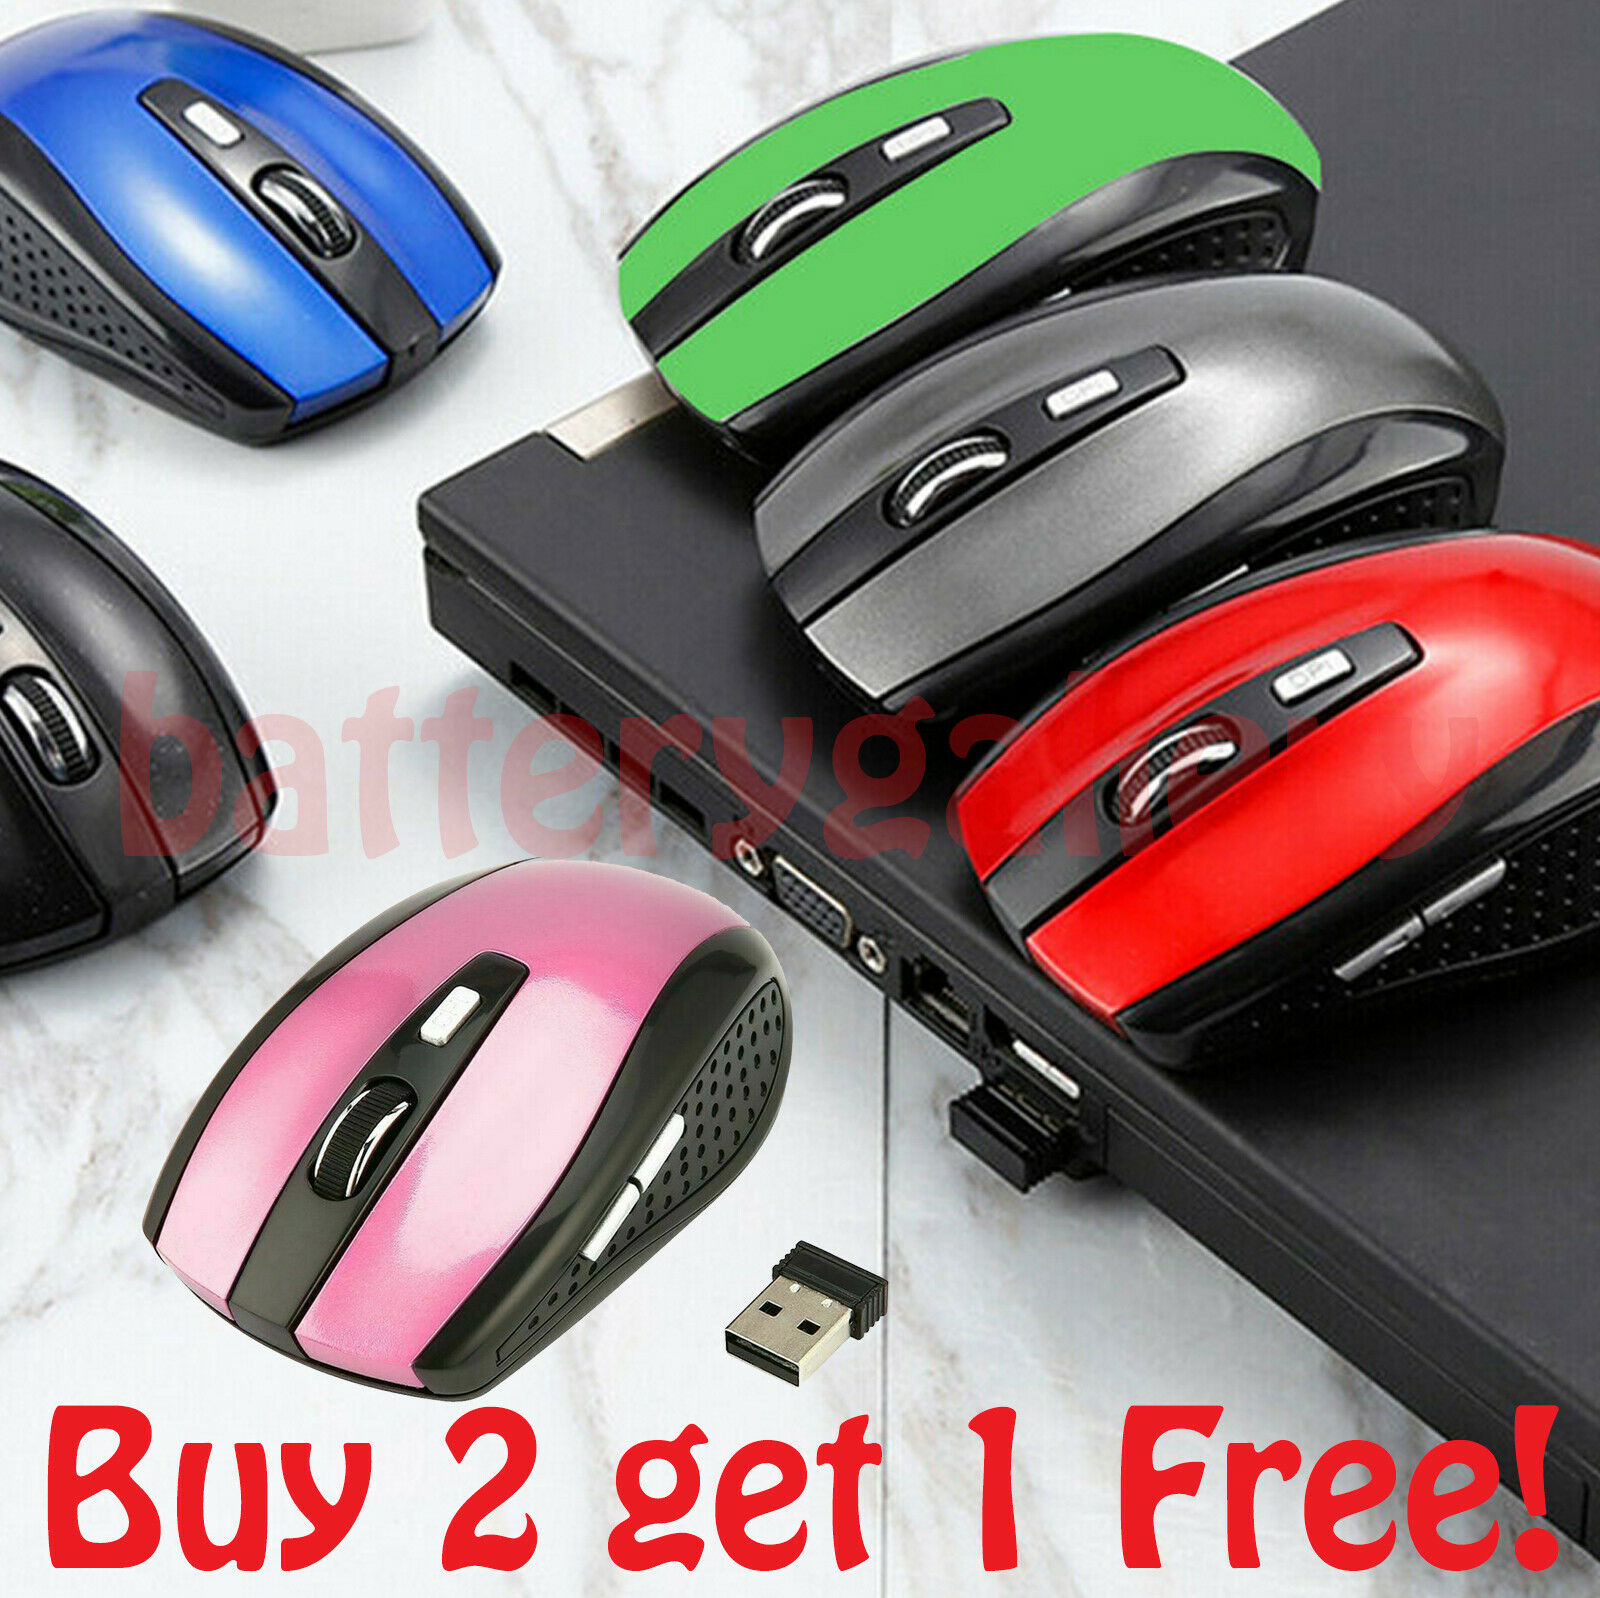 2.4ghz High Quality Wireless Optical Mouse/mice + Usb 2.0 Receiver For Pc Laptop